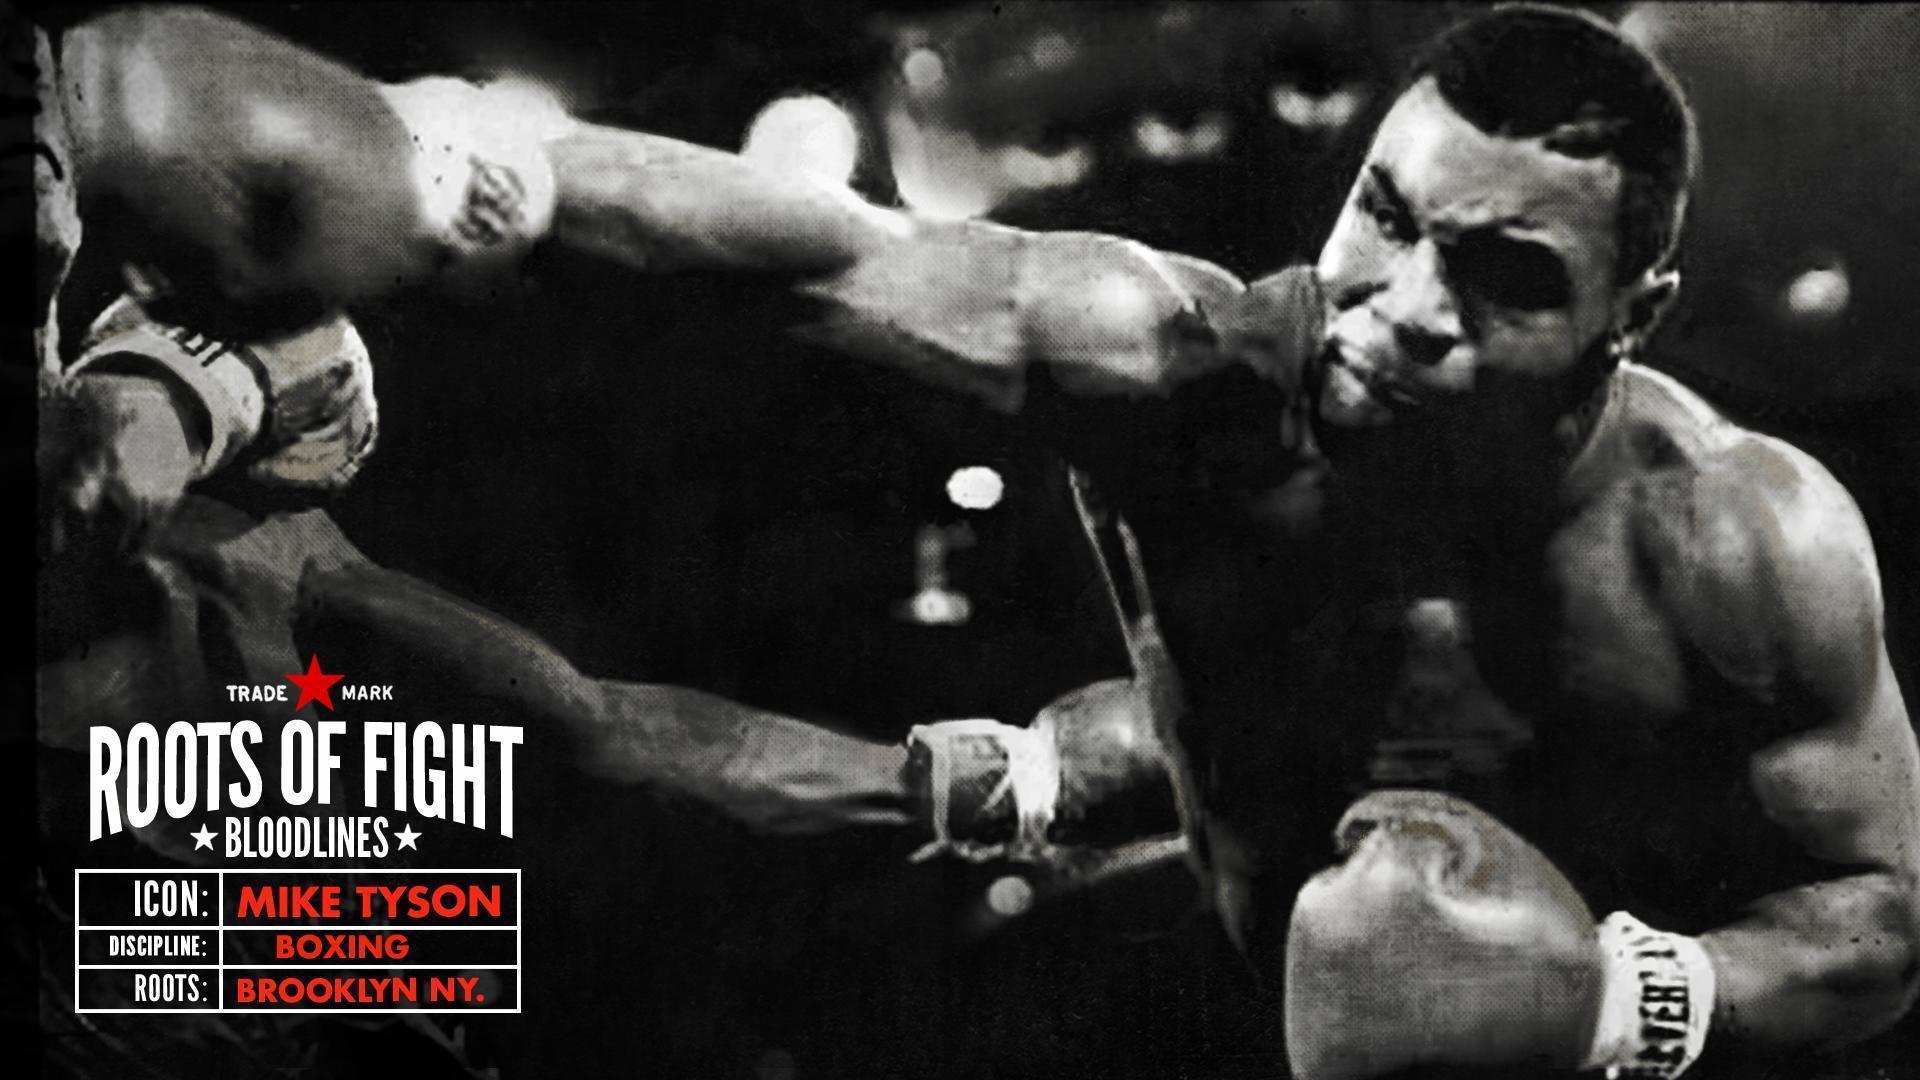 Iron Mike Tyson wallpaper and image, picture, photo